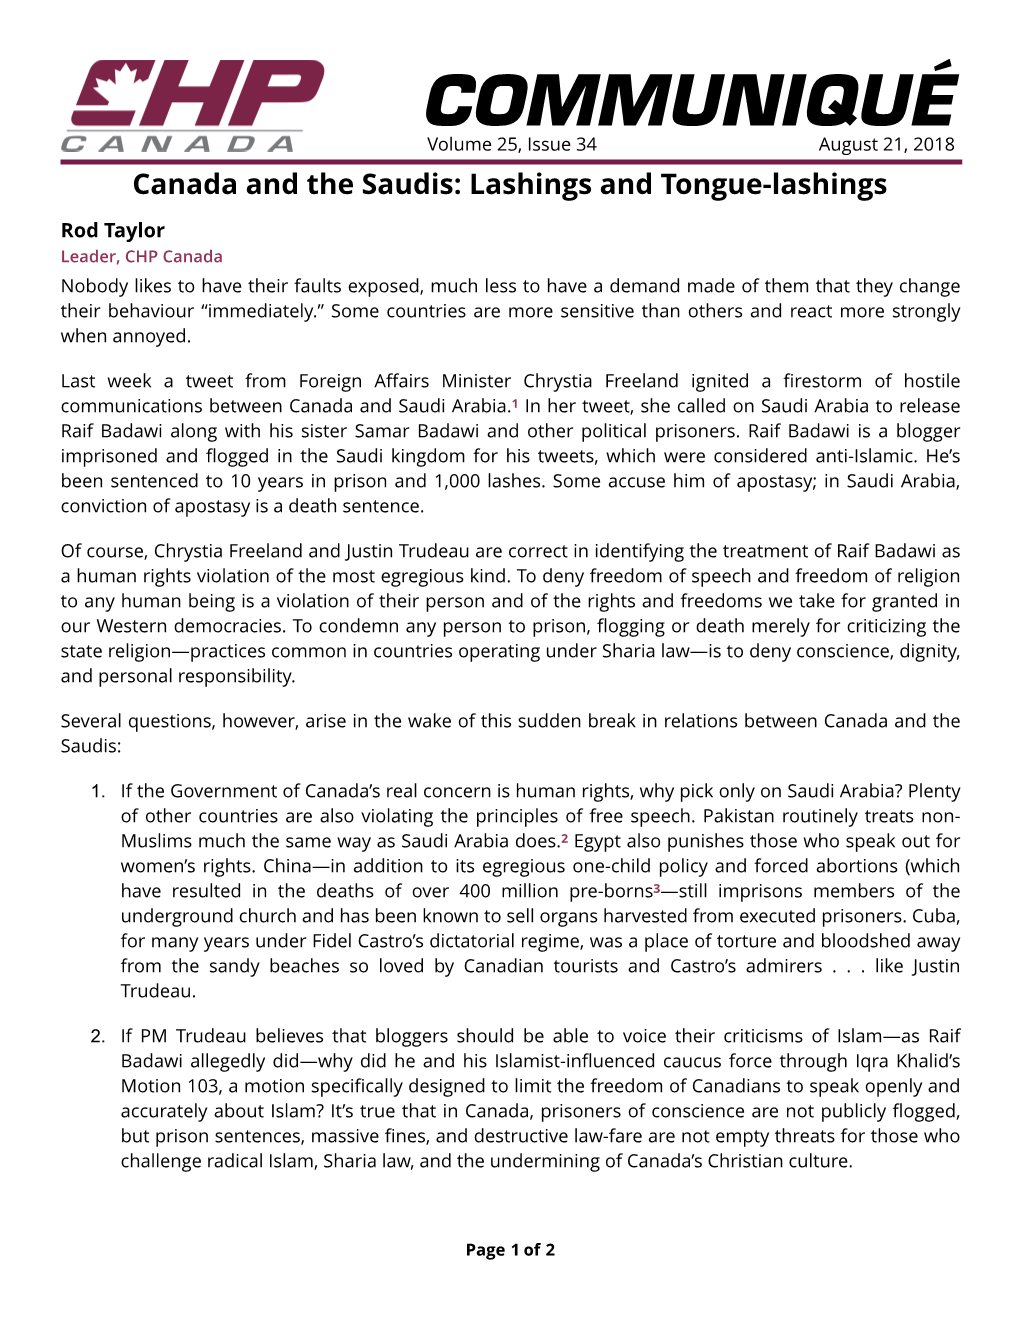 COMMUNIQUÉ Volume 25, Issue 34 August 21, 2018 Canada and the Saudis: Lashings and Tongue-Lashings